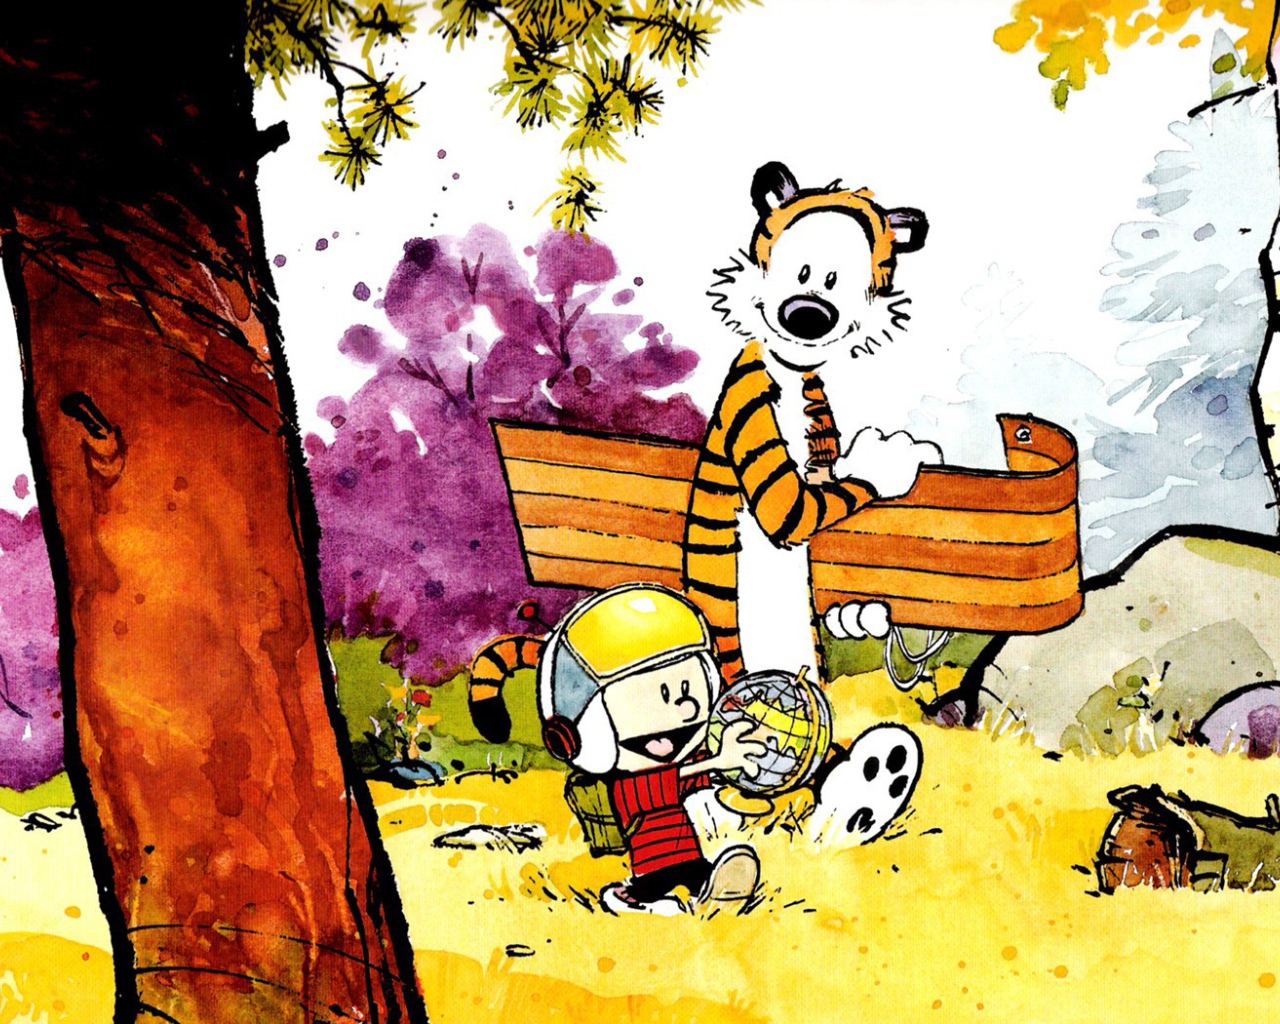 Calvin and Hobbes go for a walk